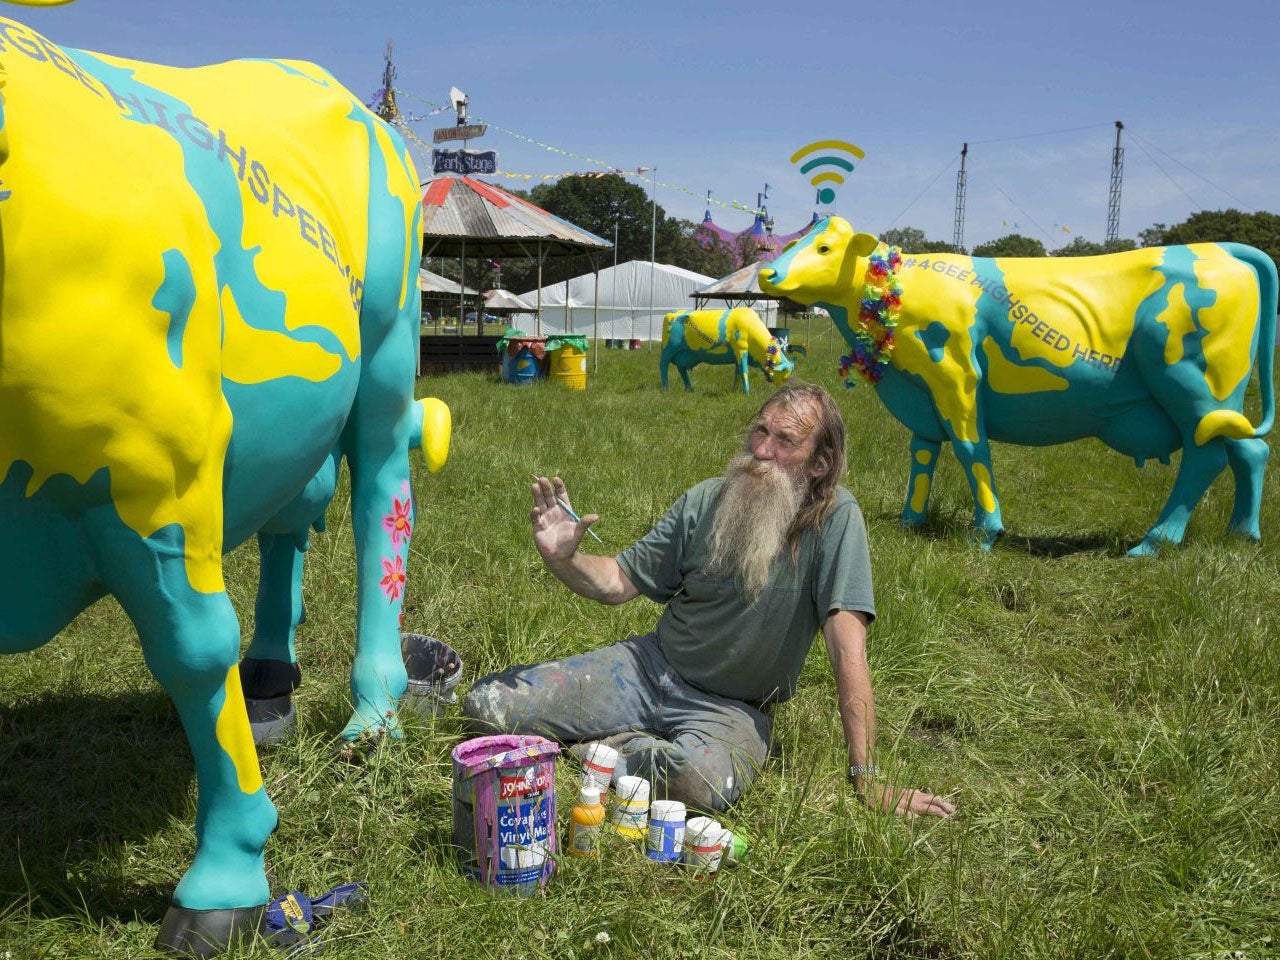 Life-size fibreglass cows decorated by artist Hank Kruger, modelled on Worthy Farm's famous dairy herd, which have been converted into 4G wifi hotspots to benefit festival goers at this year's Glastonbury.